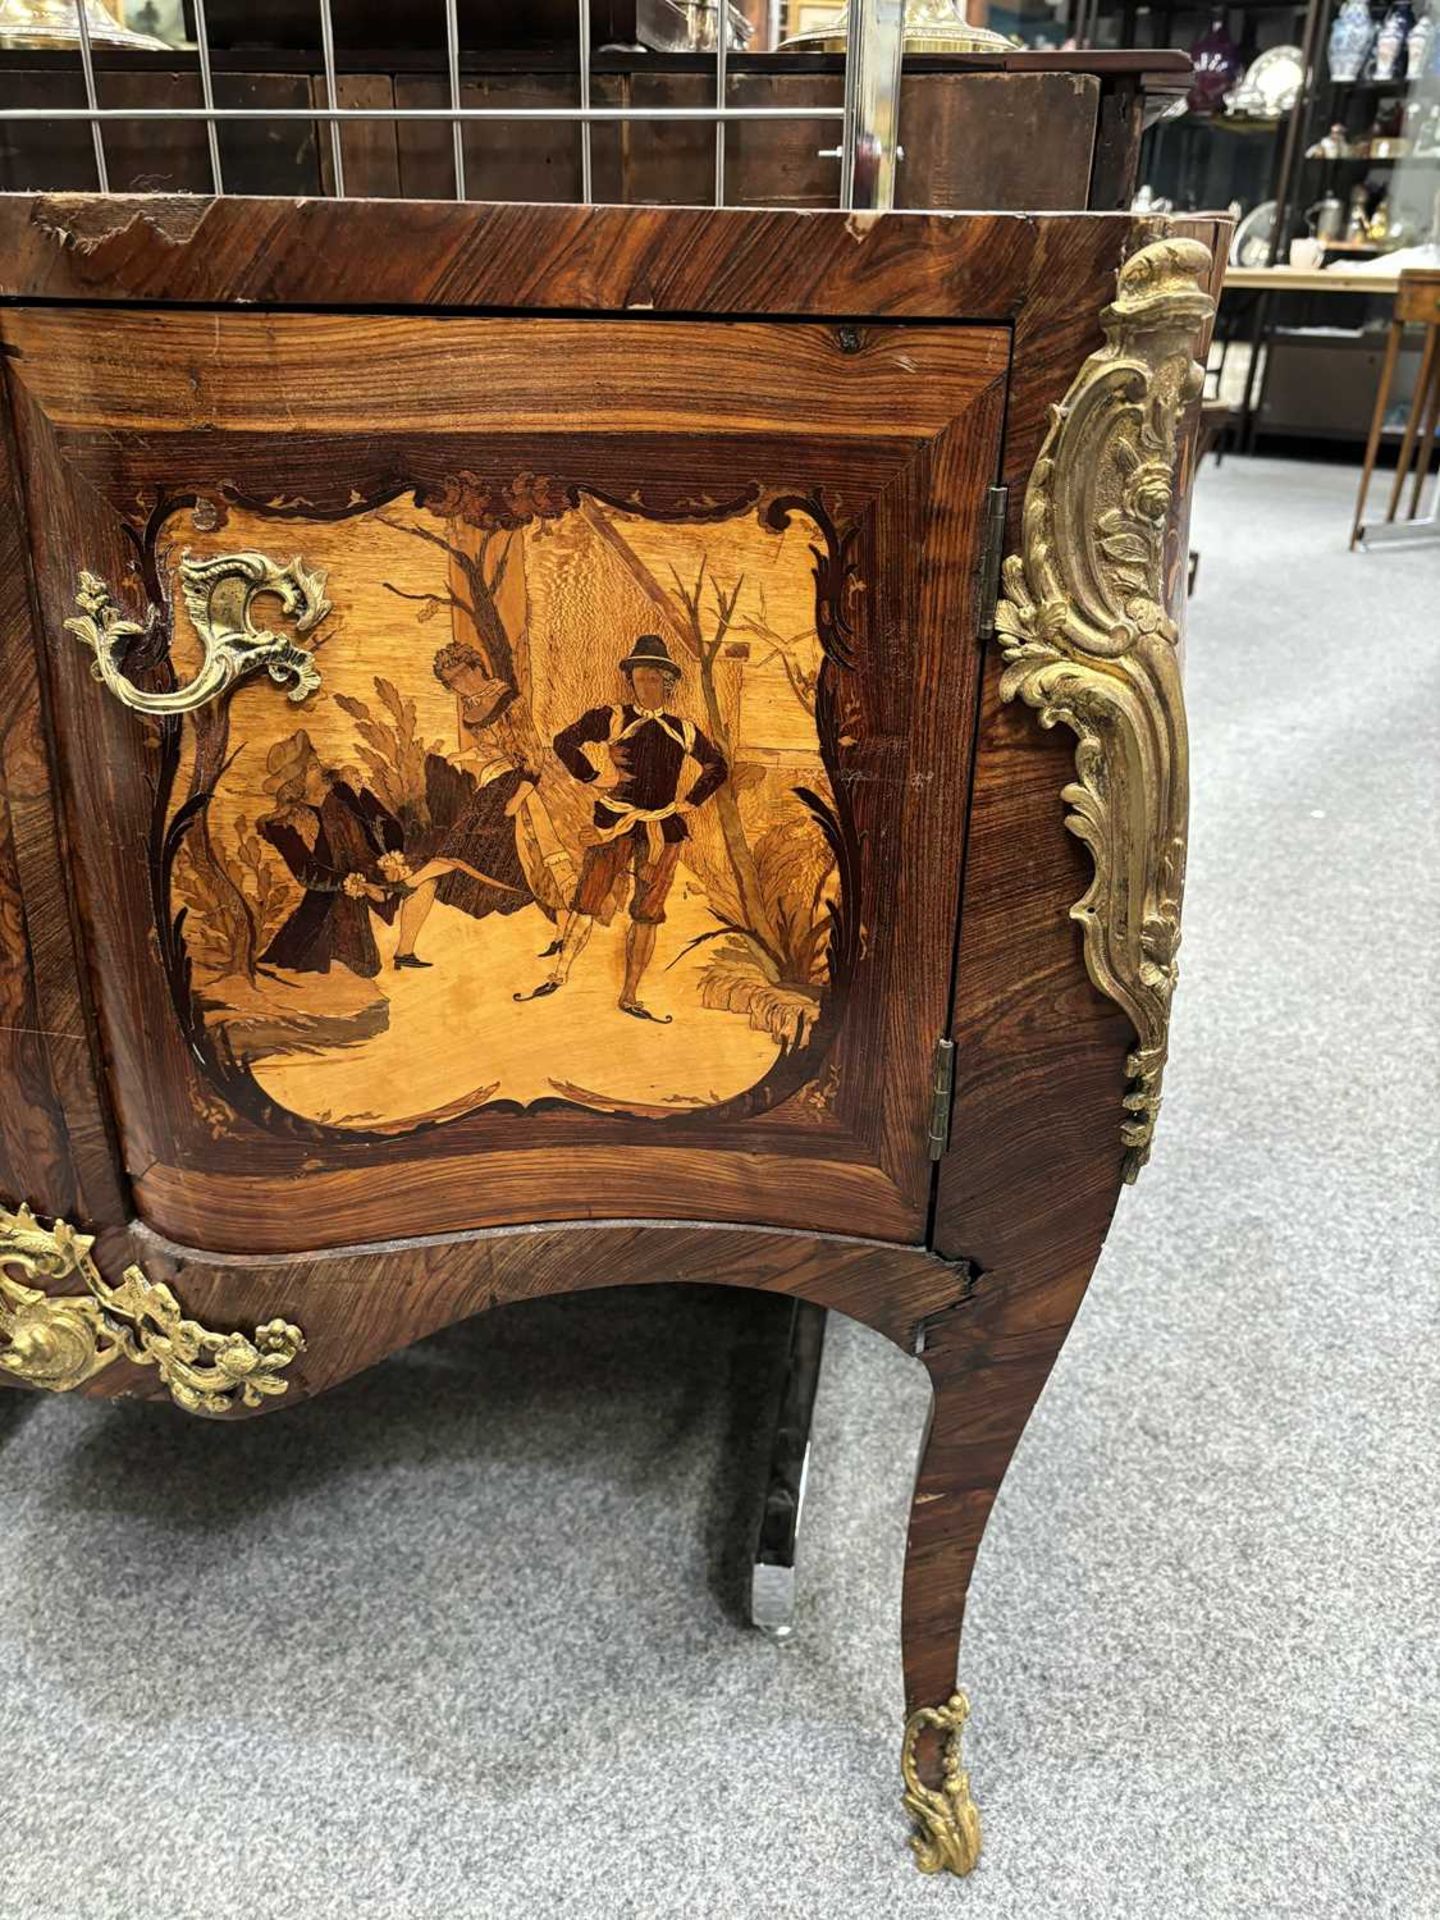 A SMALL 19TH CENTURY FRENCH INLAID KINGWOOD MARBLE-TOPPED COMMODE, STAMPED L. DROMARD, PARIS - Image 5 of 15